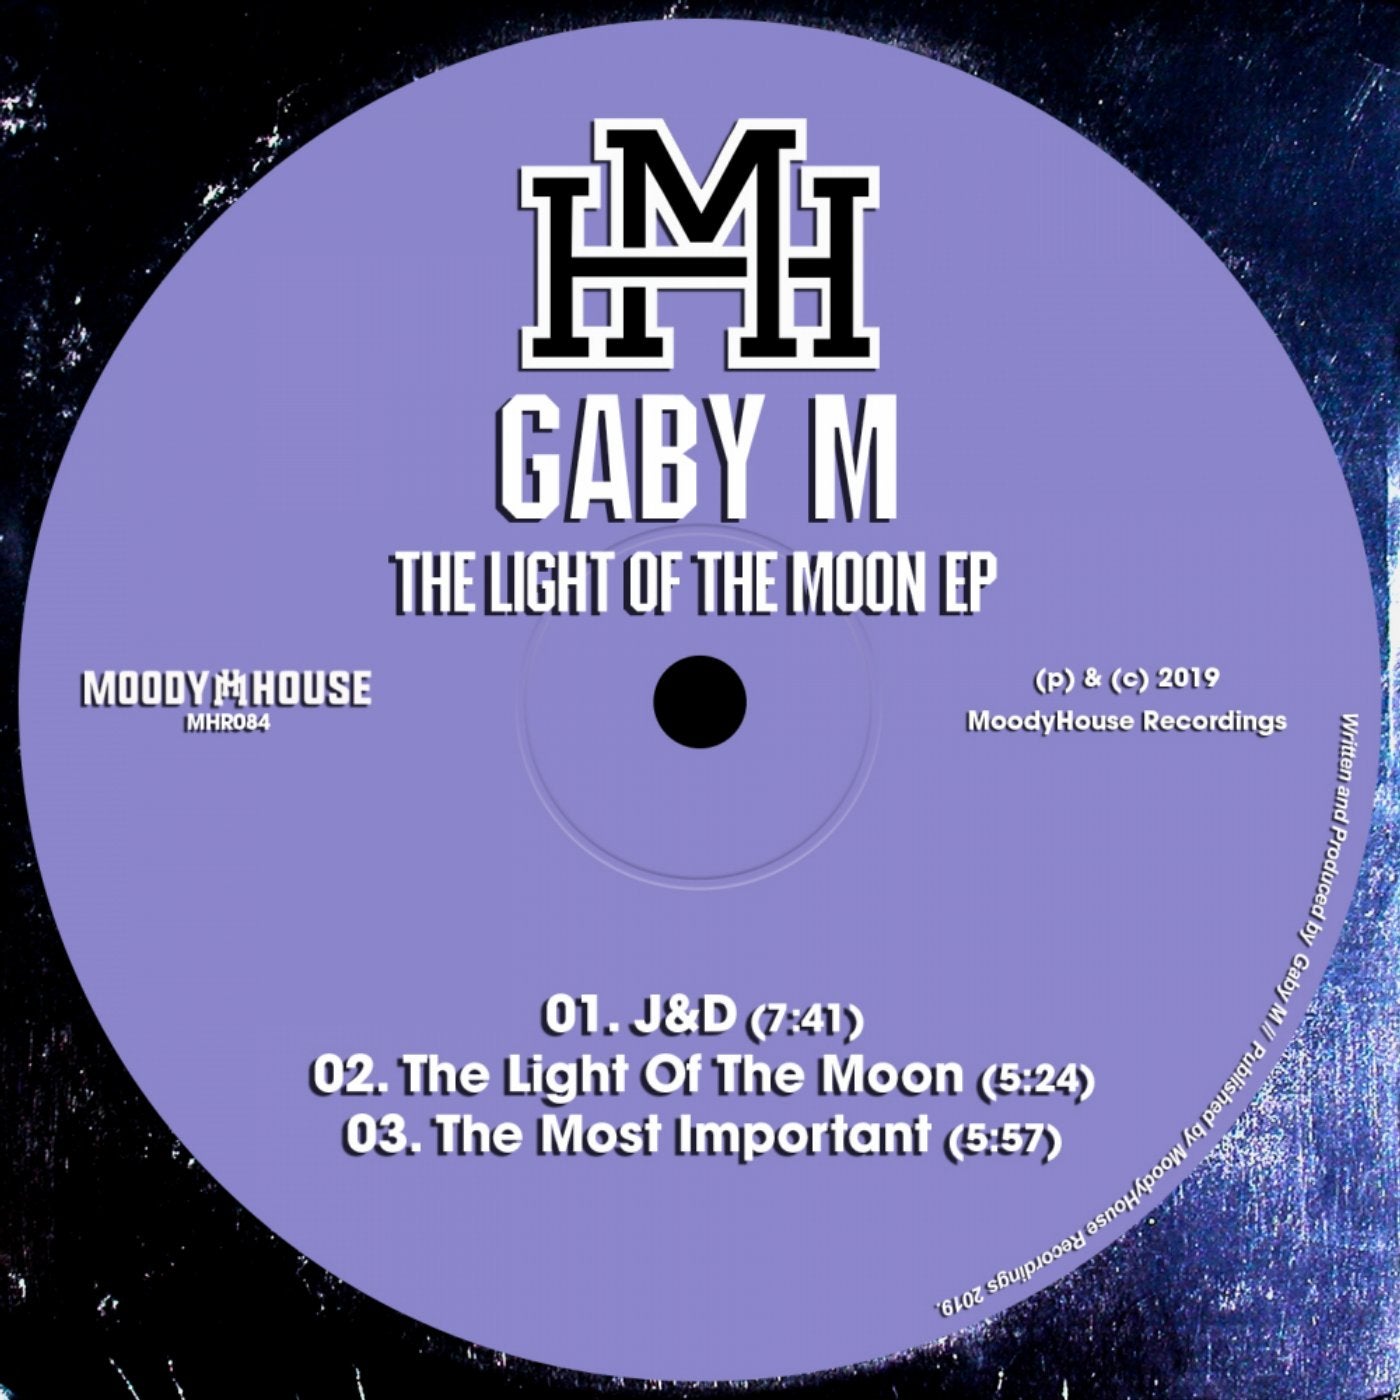 The Light Of The Moon EP